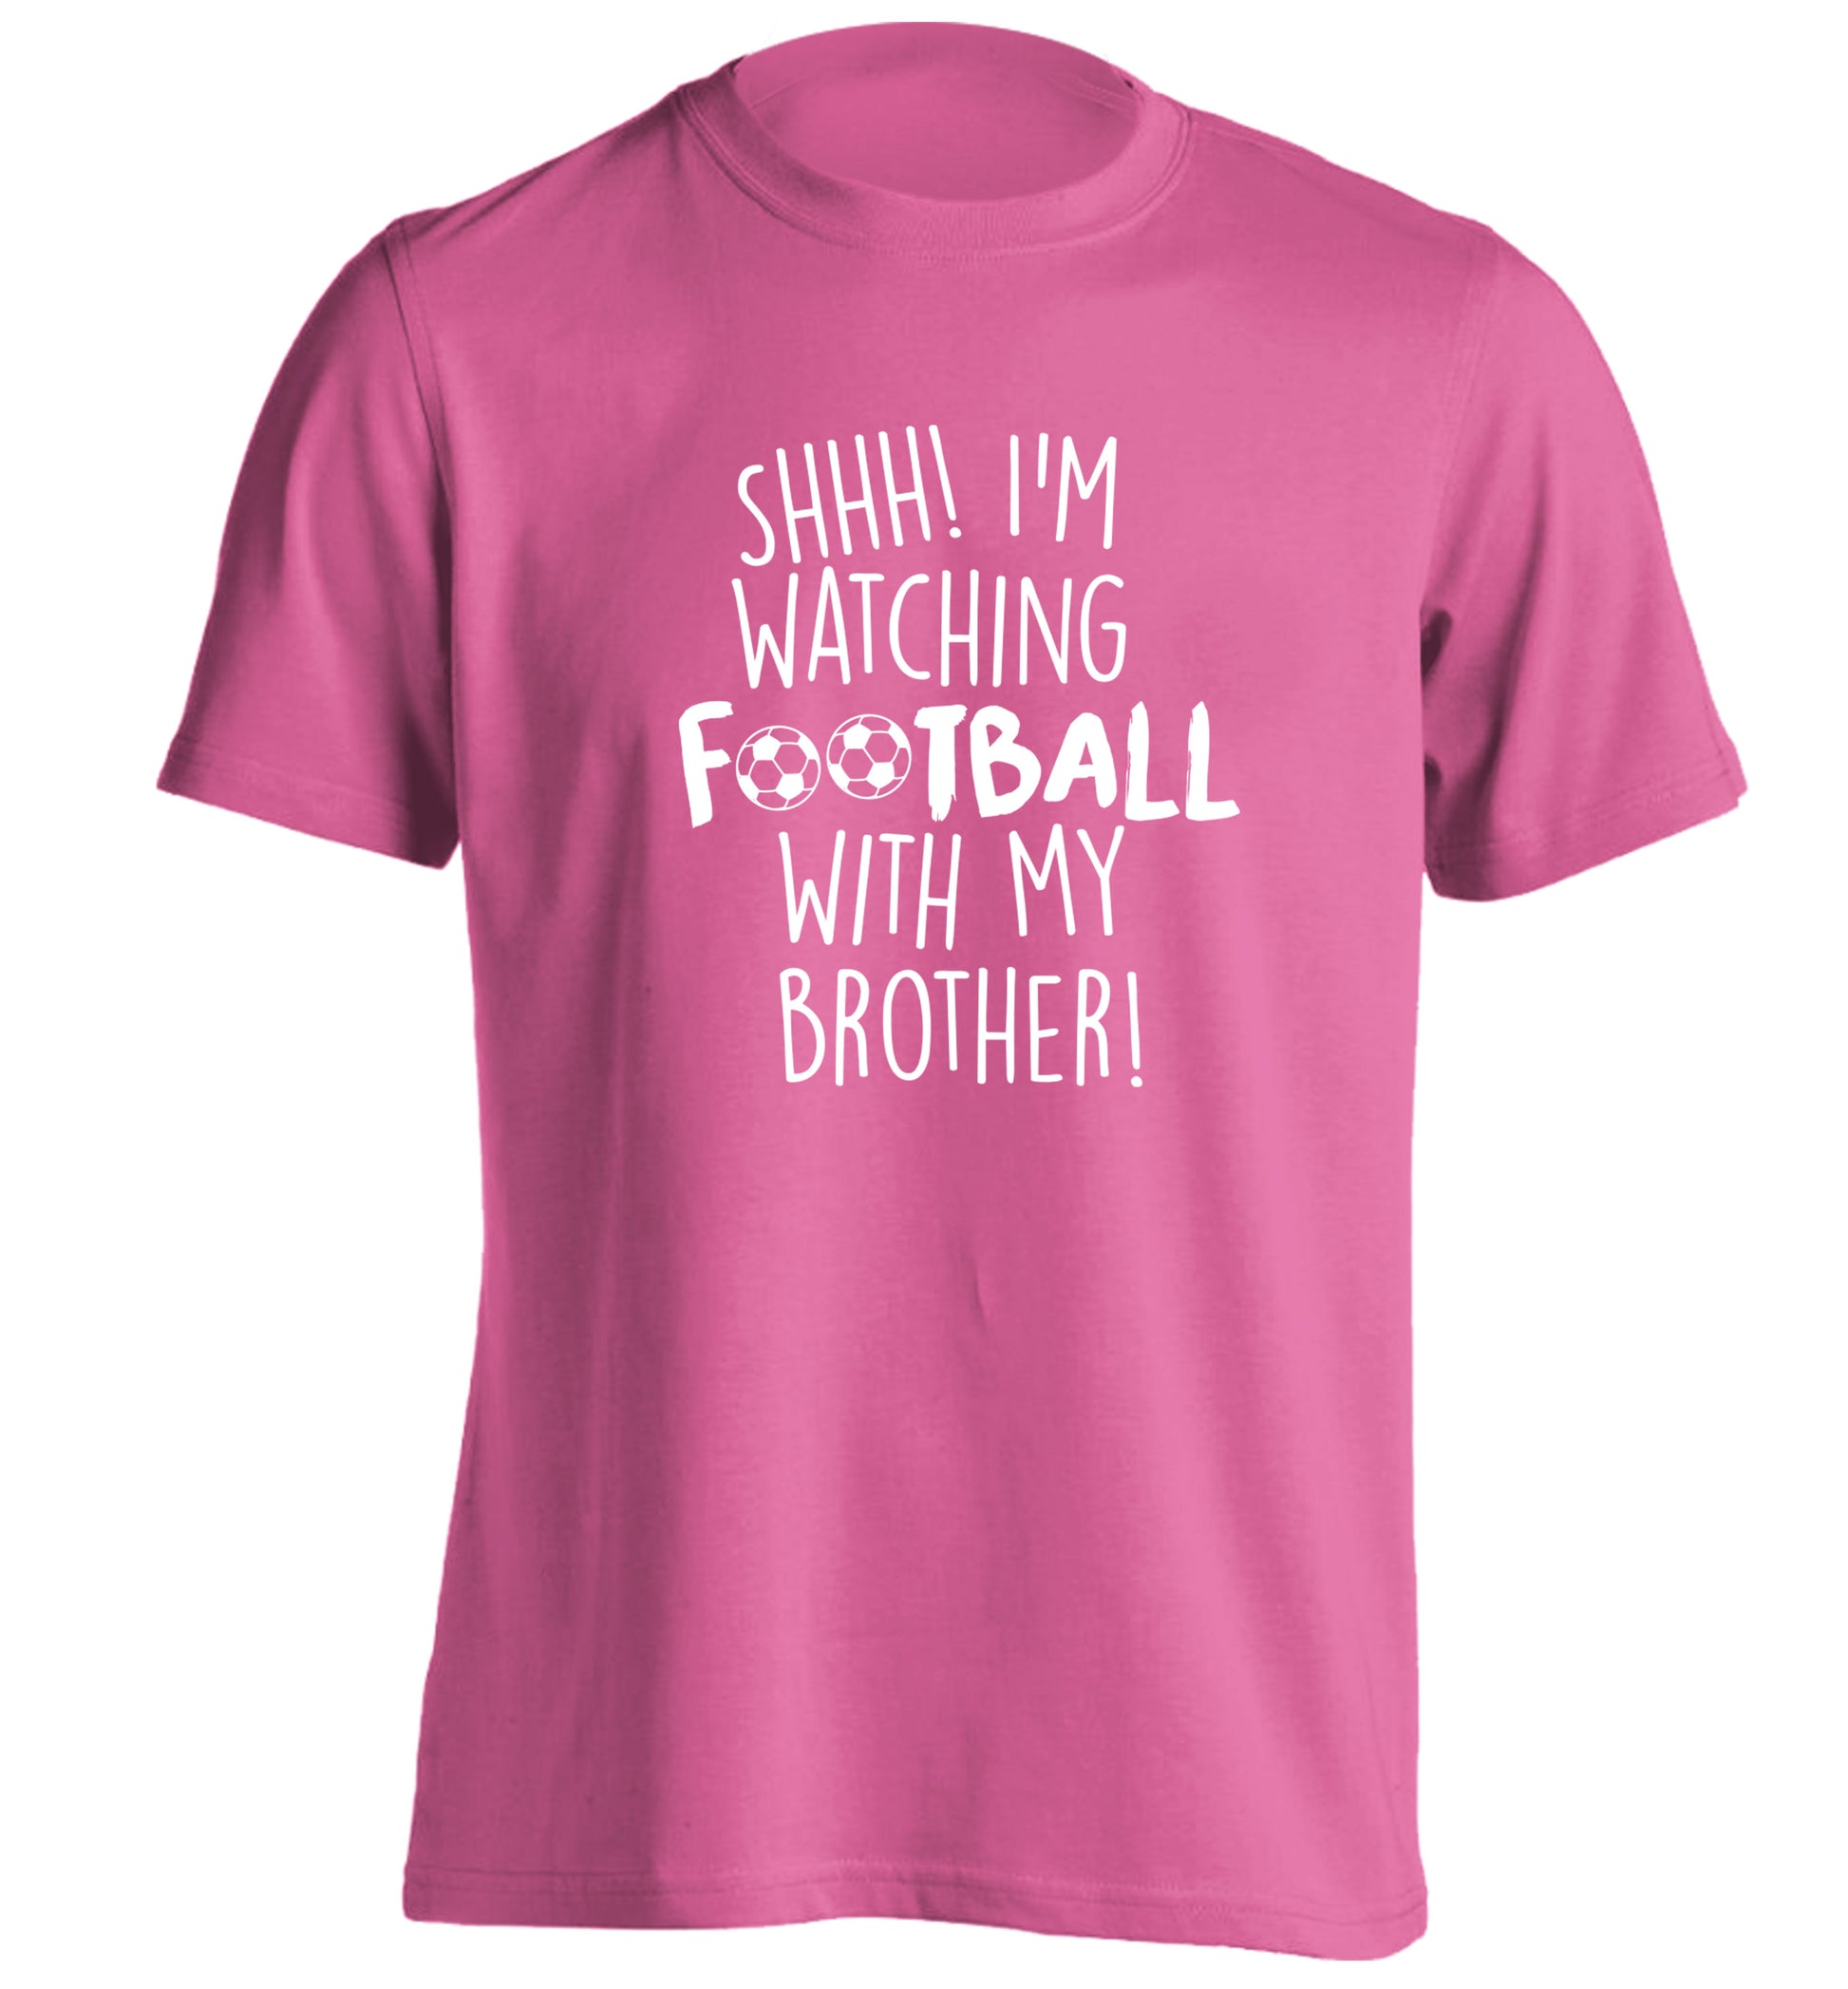 Shhh I'm watching football with my brother adults unisexpink Tshirt 2XL